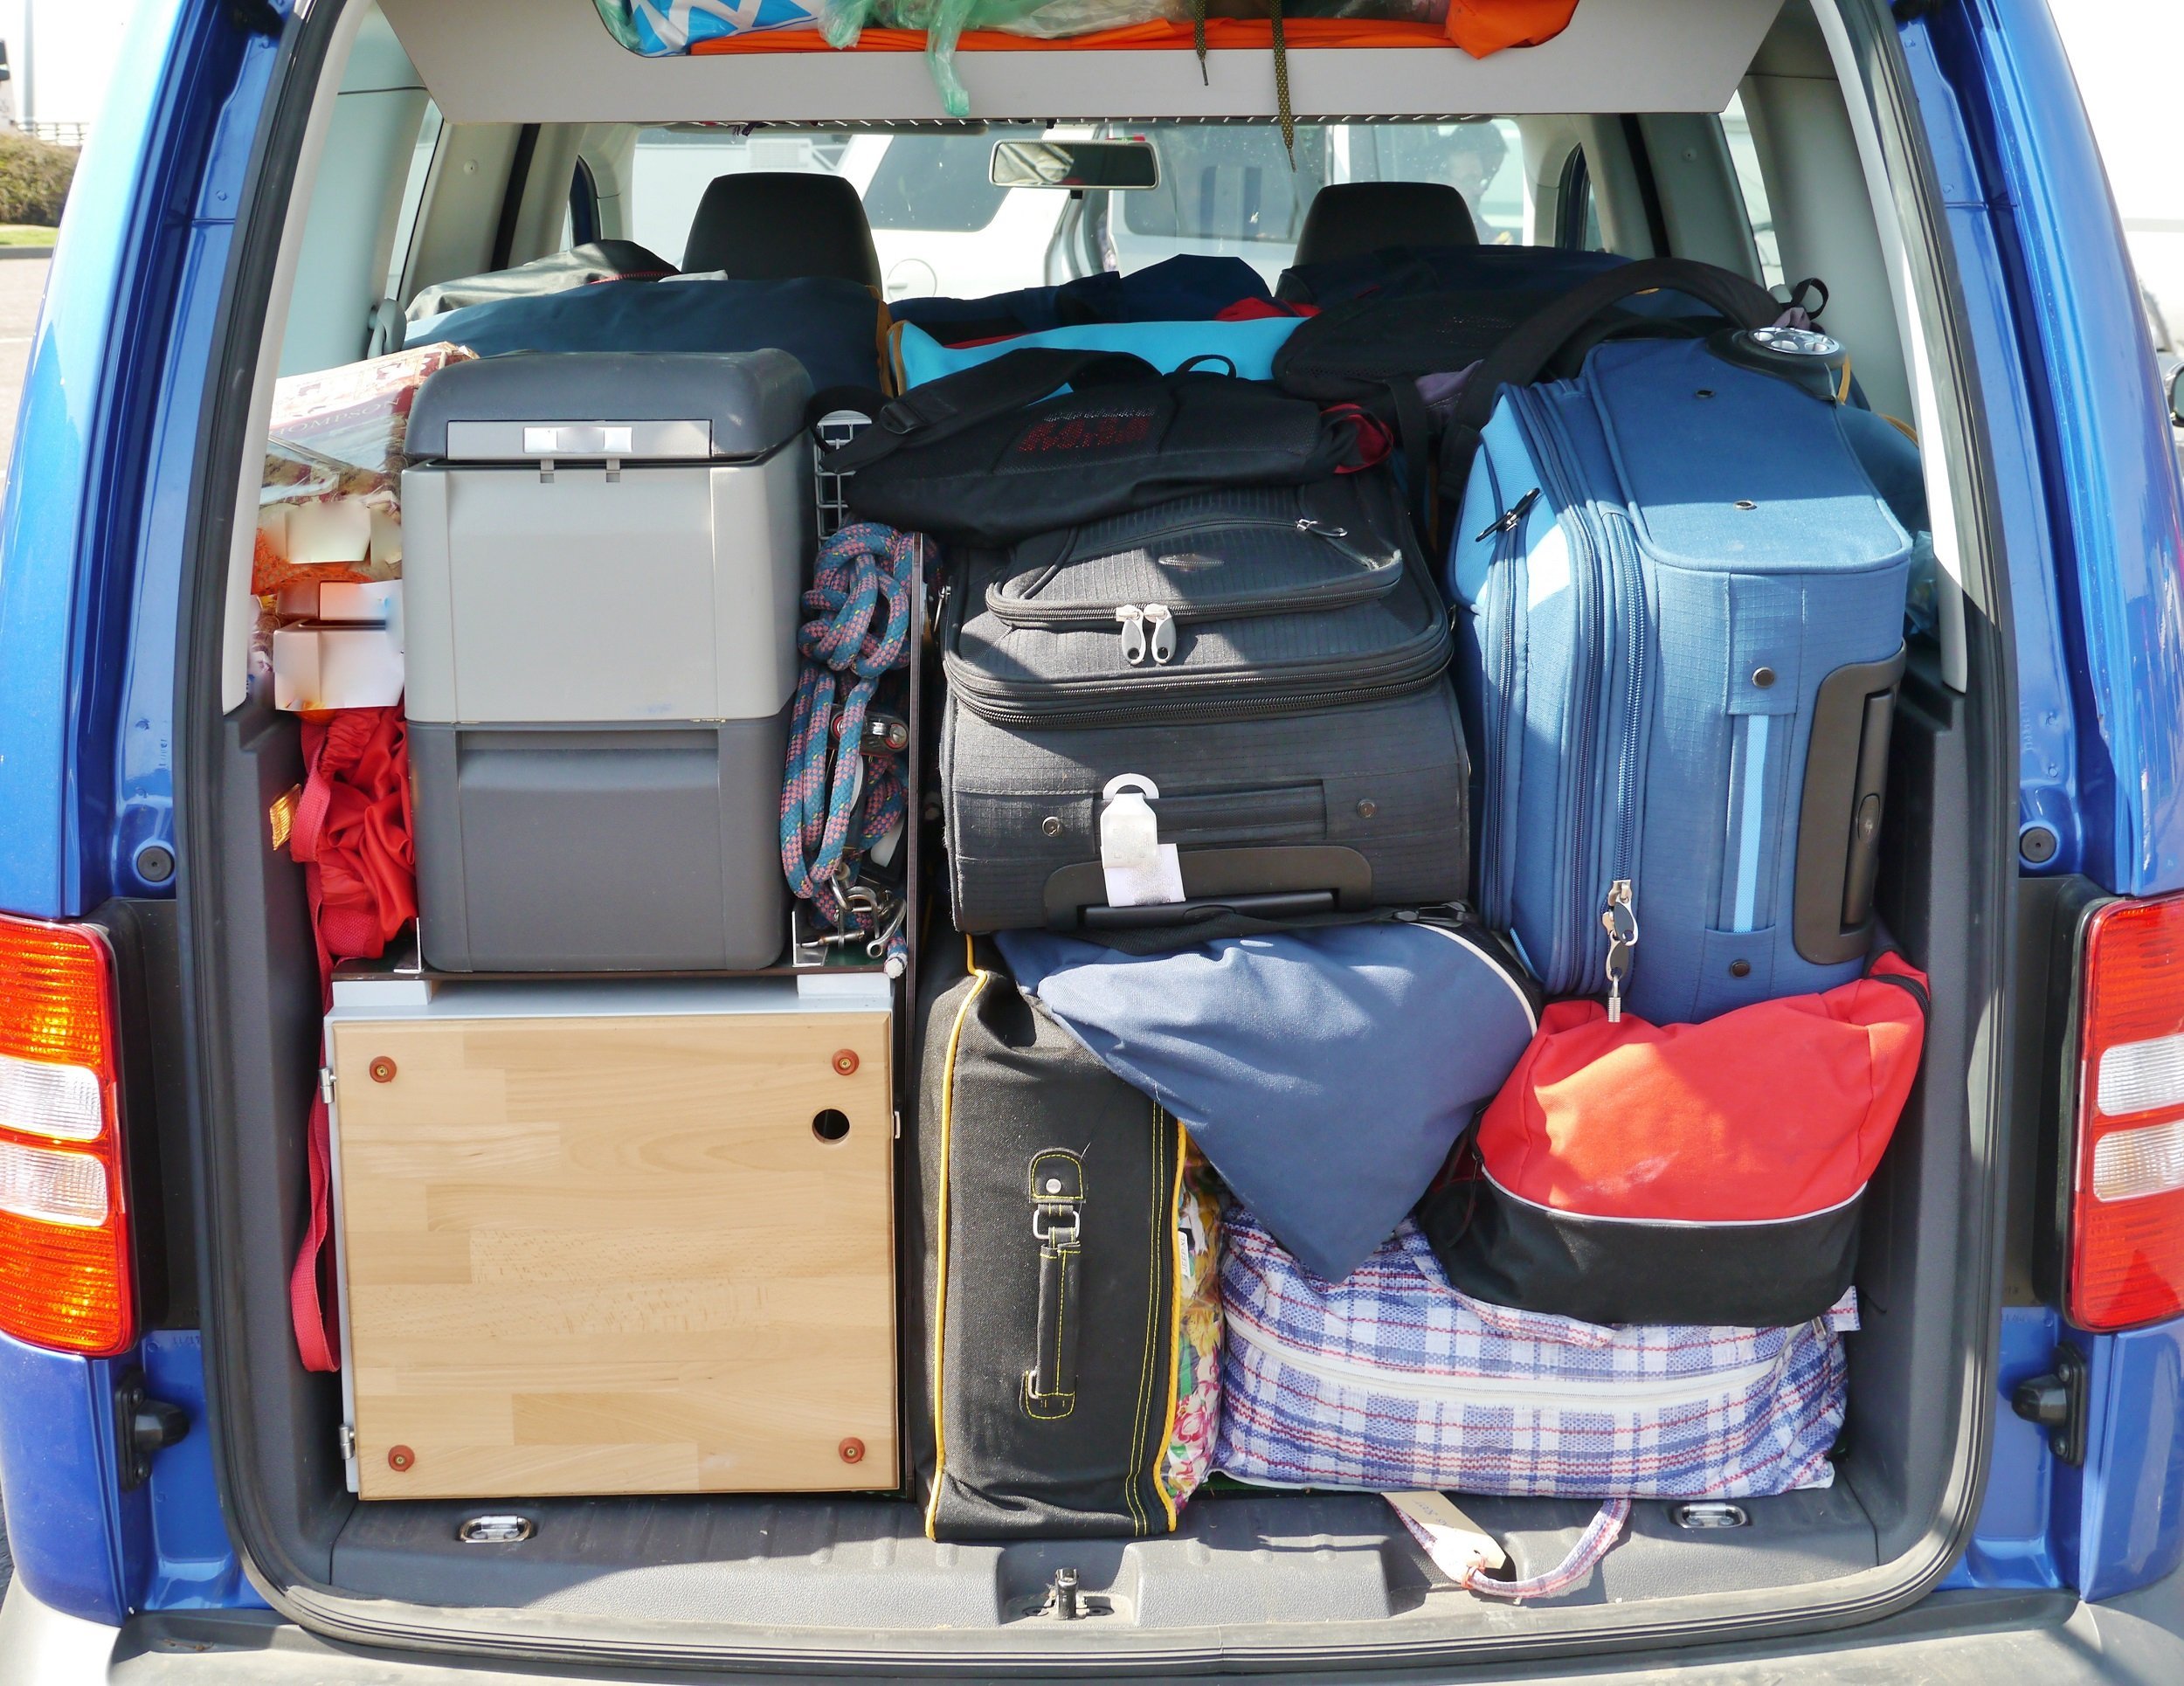 How to Pack Your Car the Tetris Way